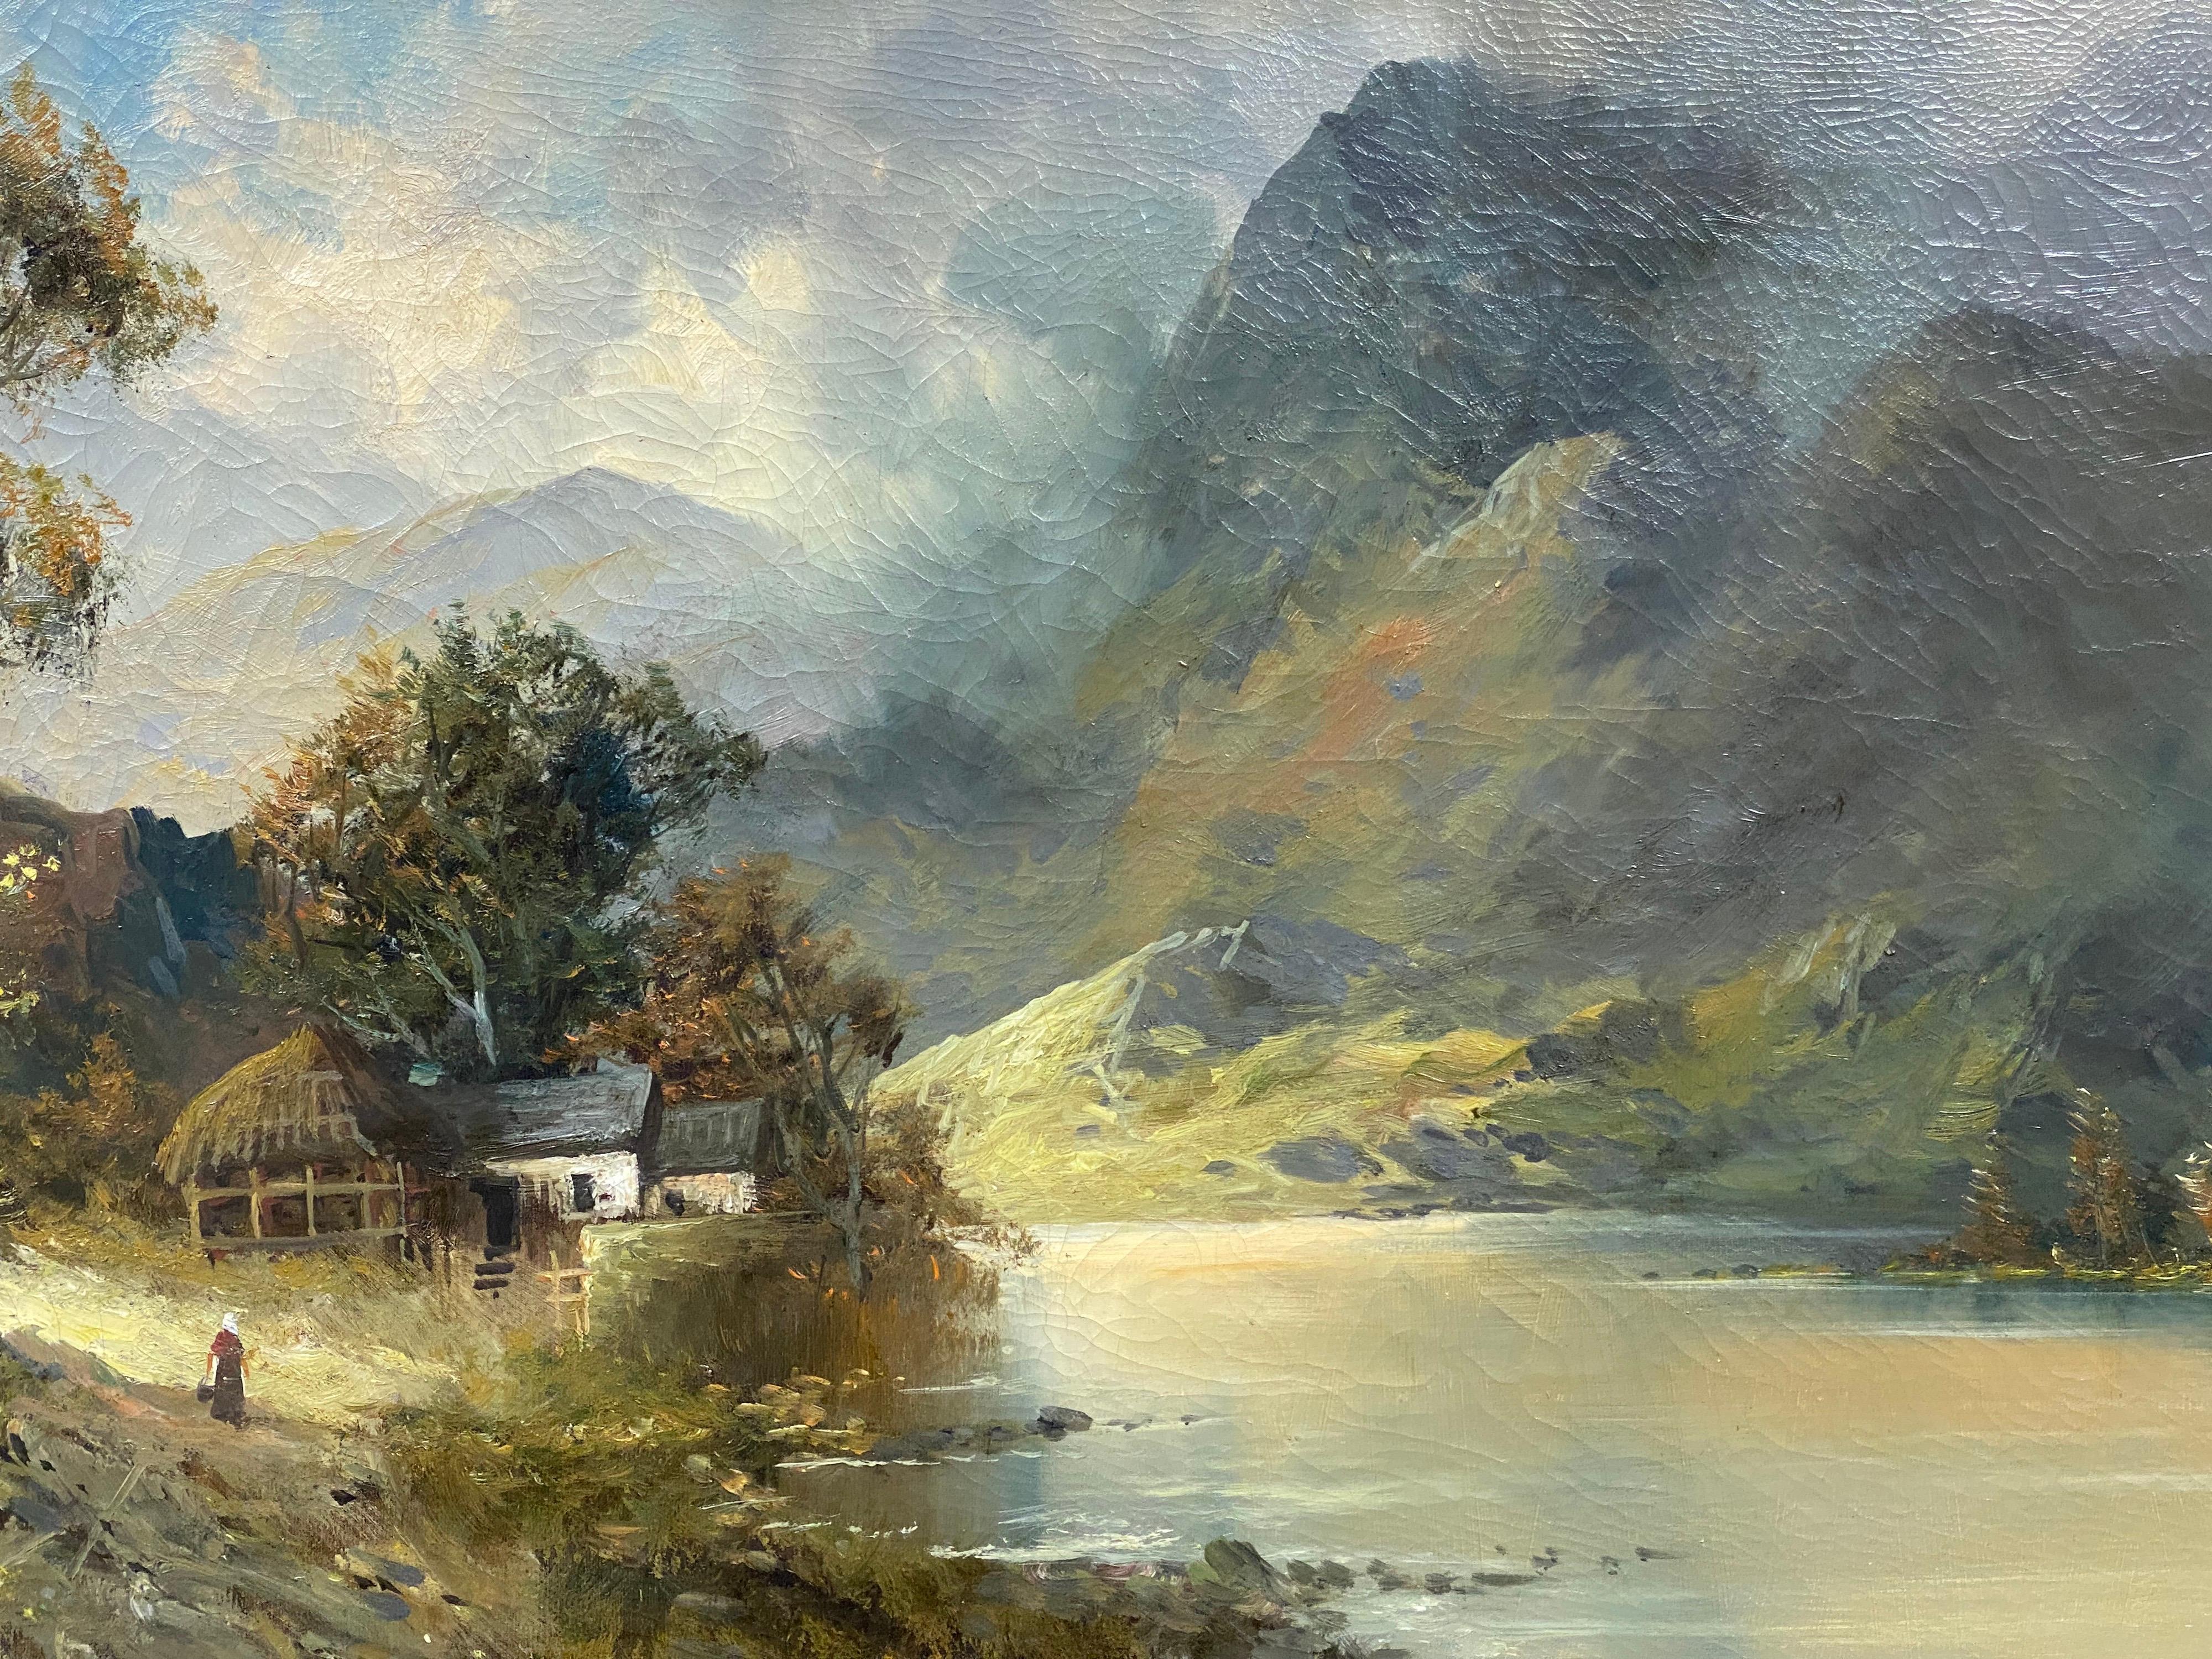 Antique Scottish Framed Highlands Oil Painting The Loch Keepers Cottage - Gray Landscape Painting by Francis E. Jamieson